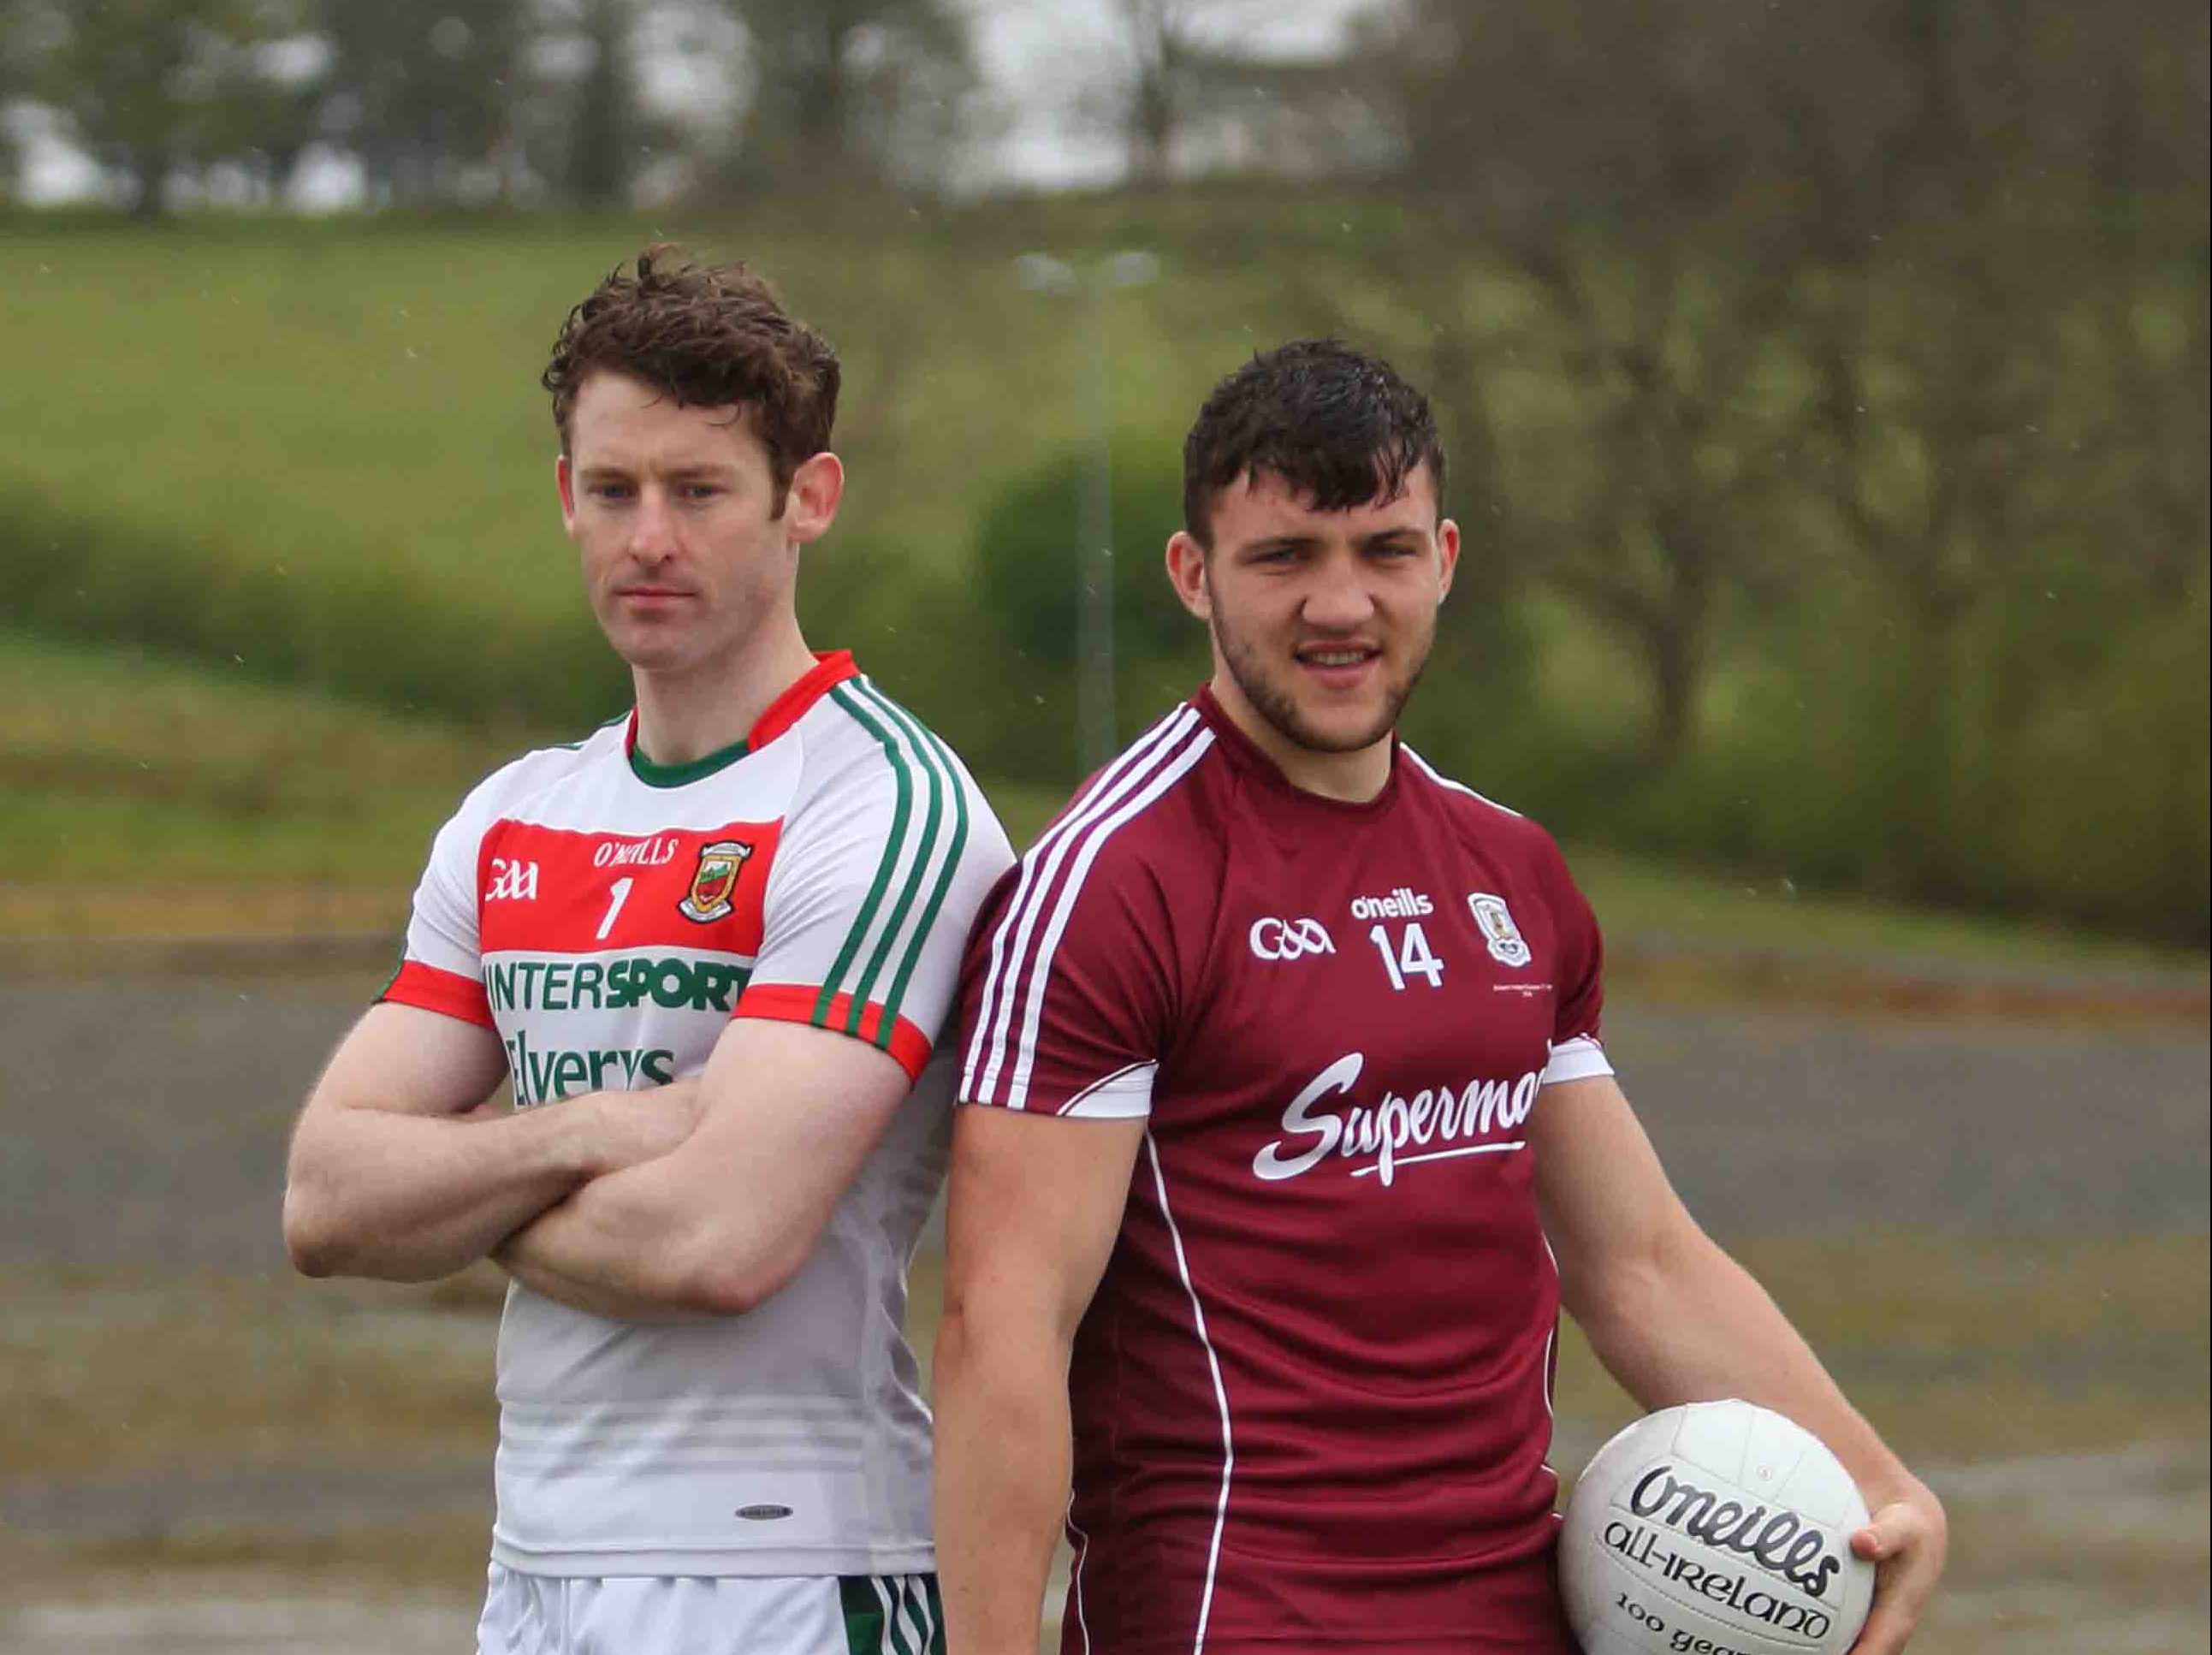 Galway and Mayo name Teams for Sunday’s Clash